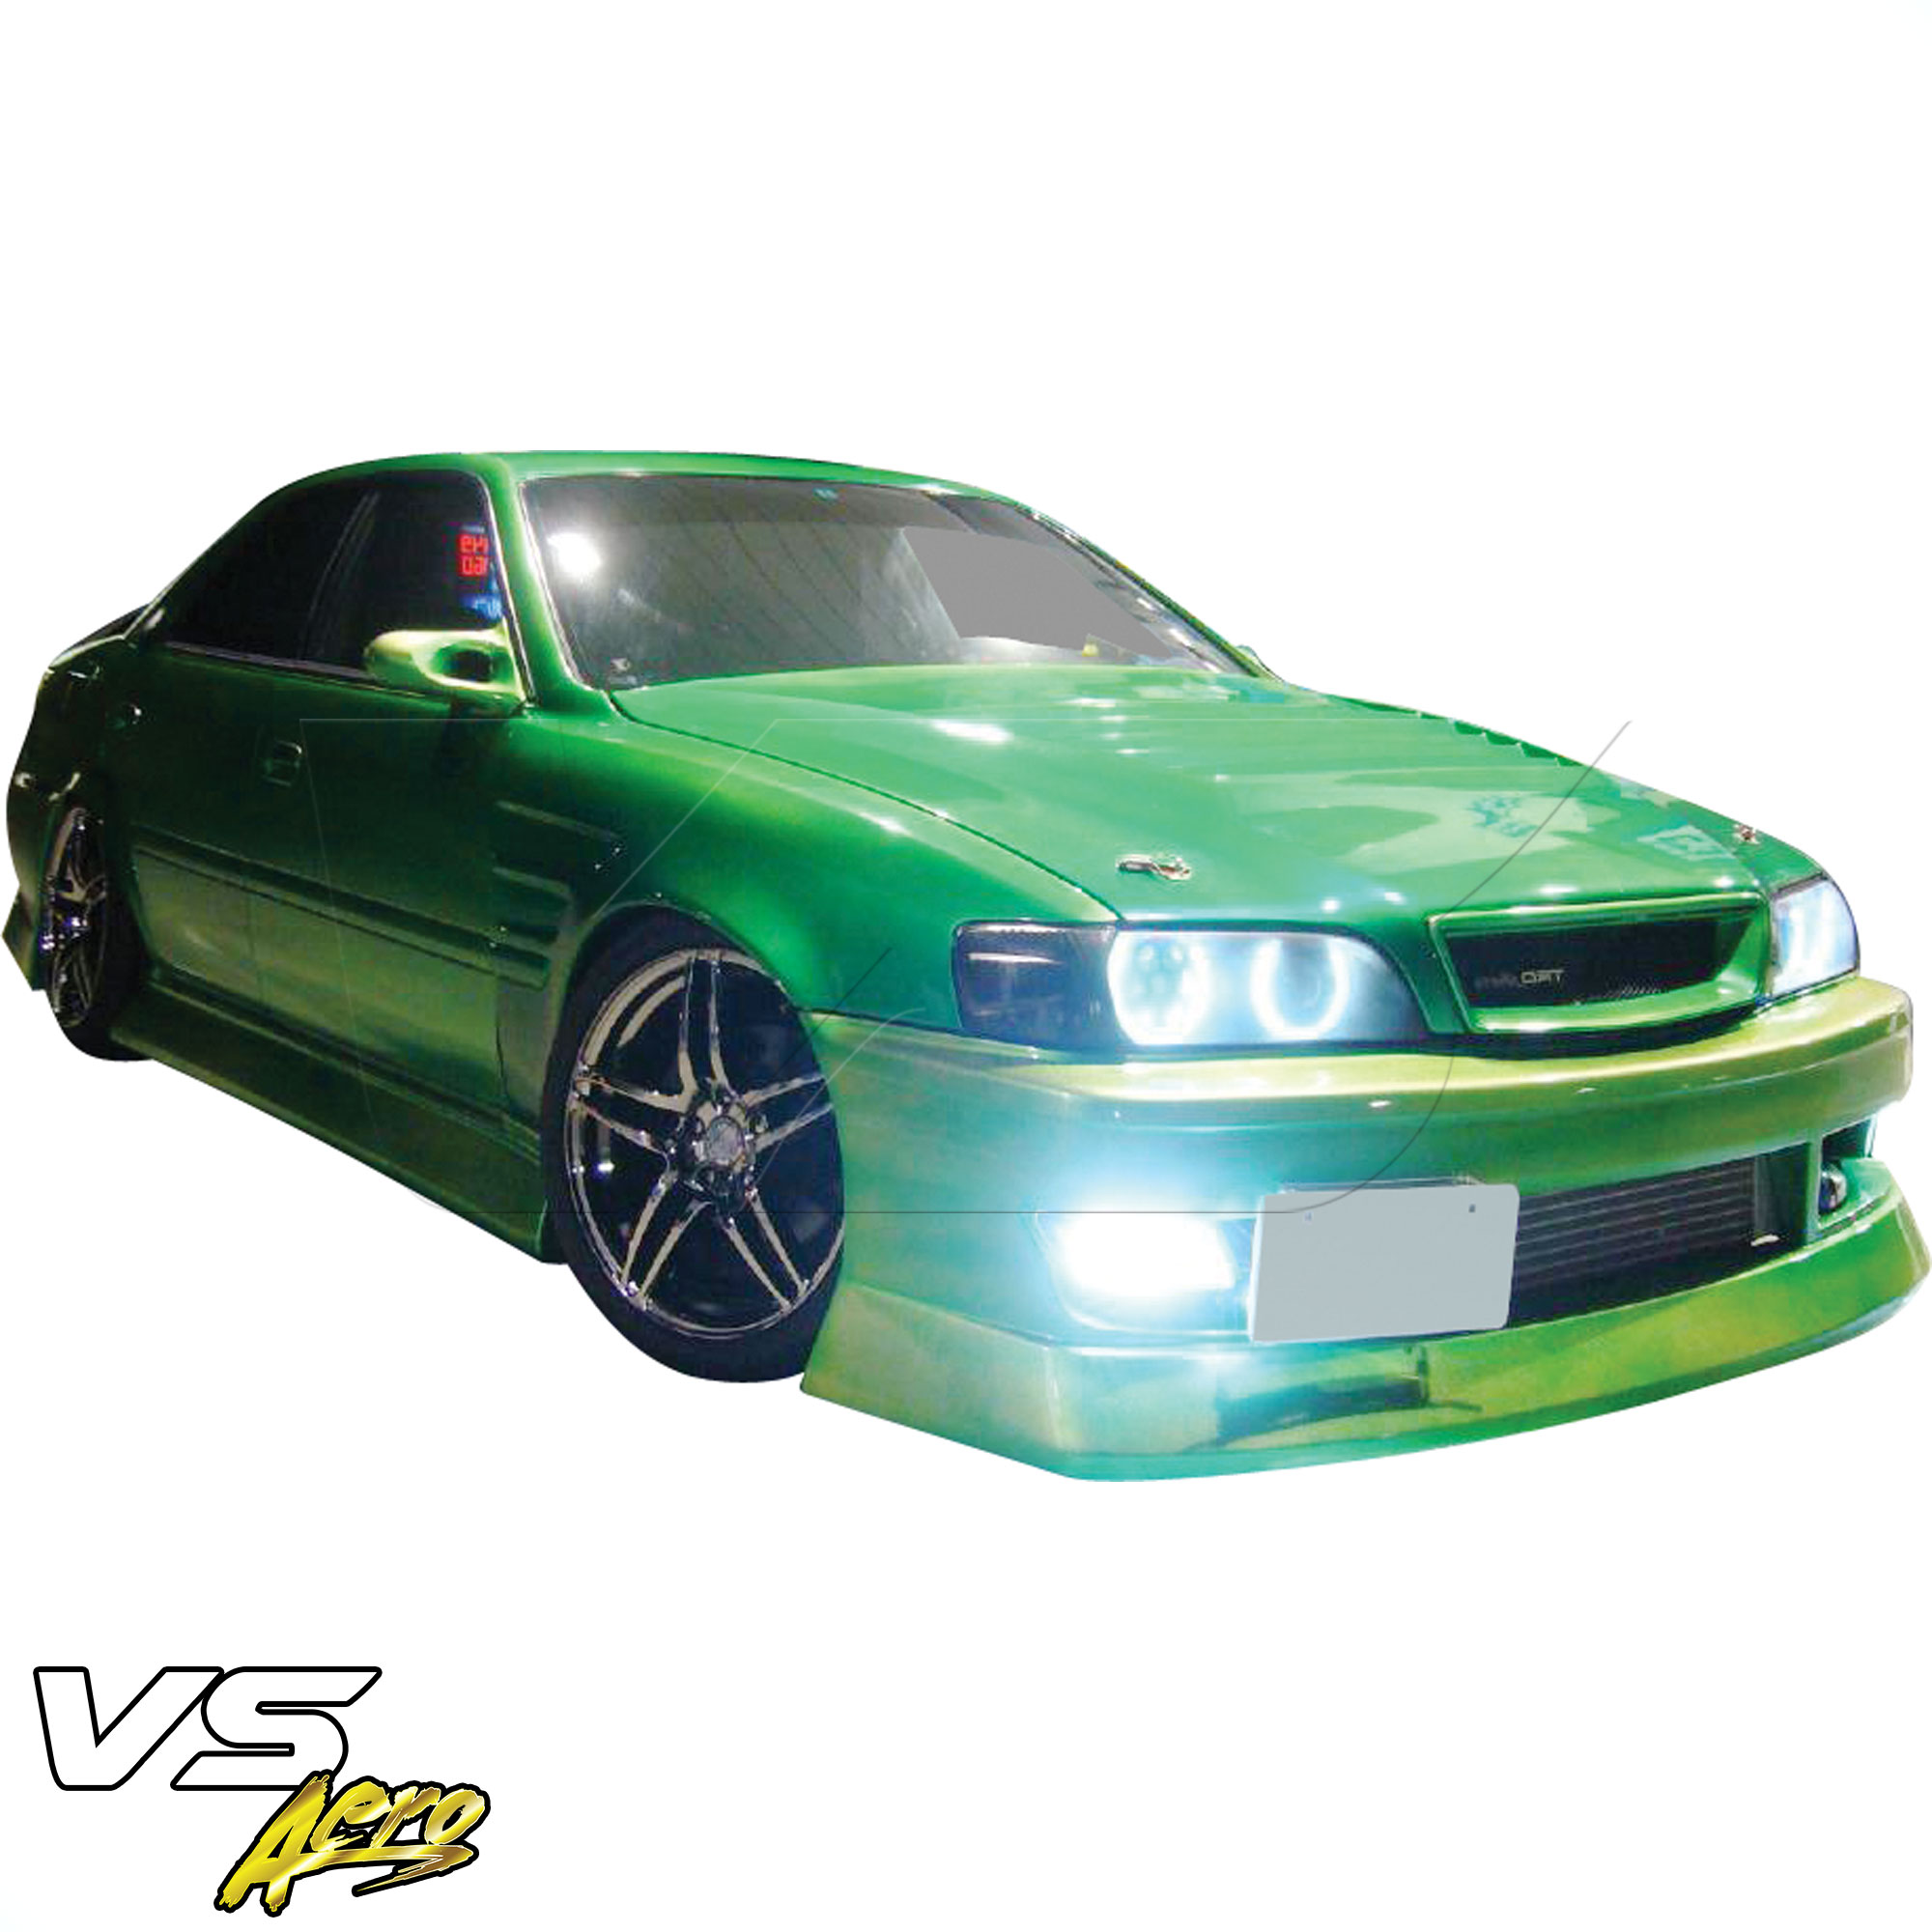 VSaero FRP BSPO Front Bumper > Toyota Chaser JZX100 1996-2000 - Image 11